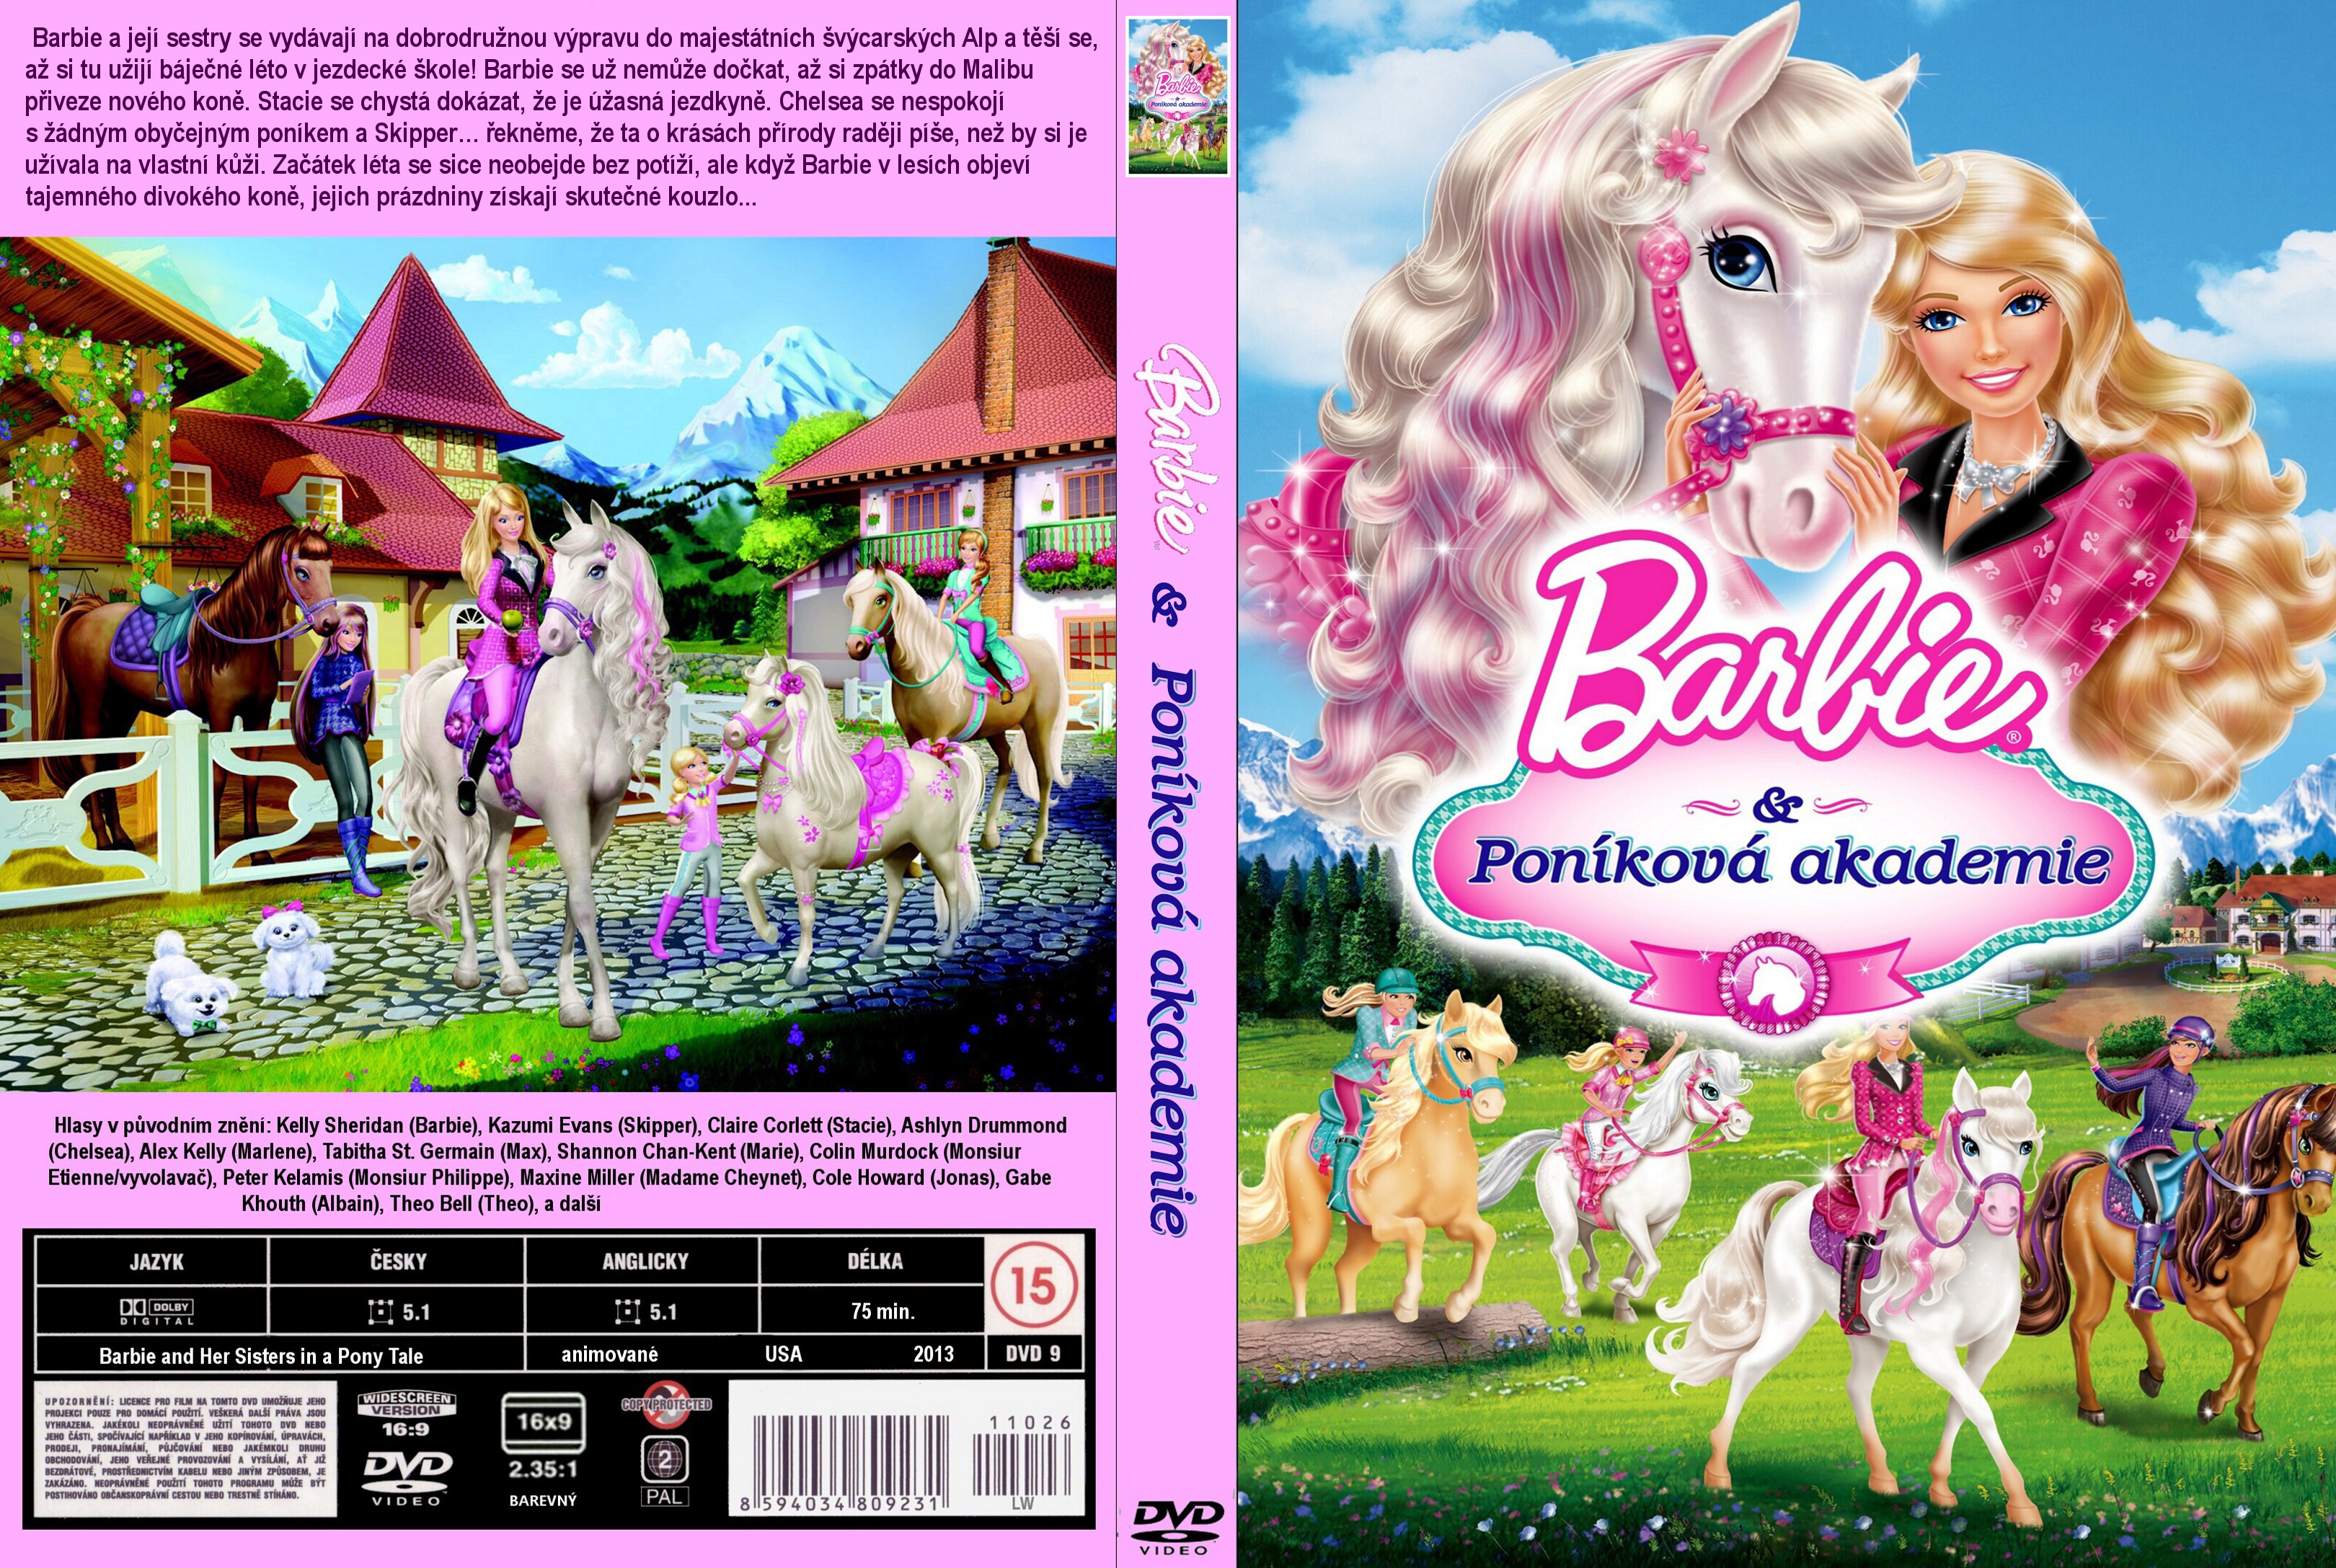 barbie & her sisters in a pony tale 2013